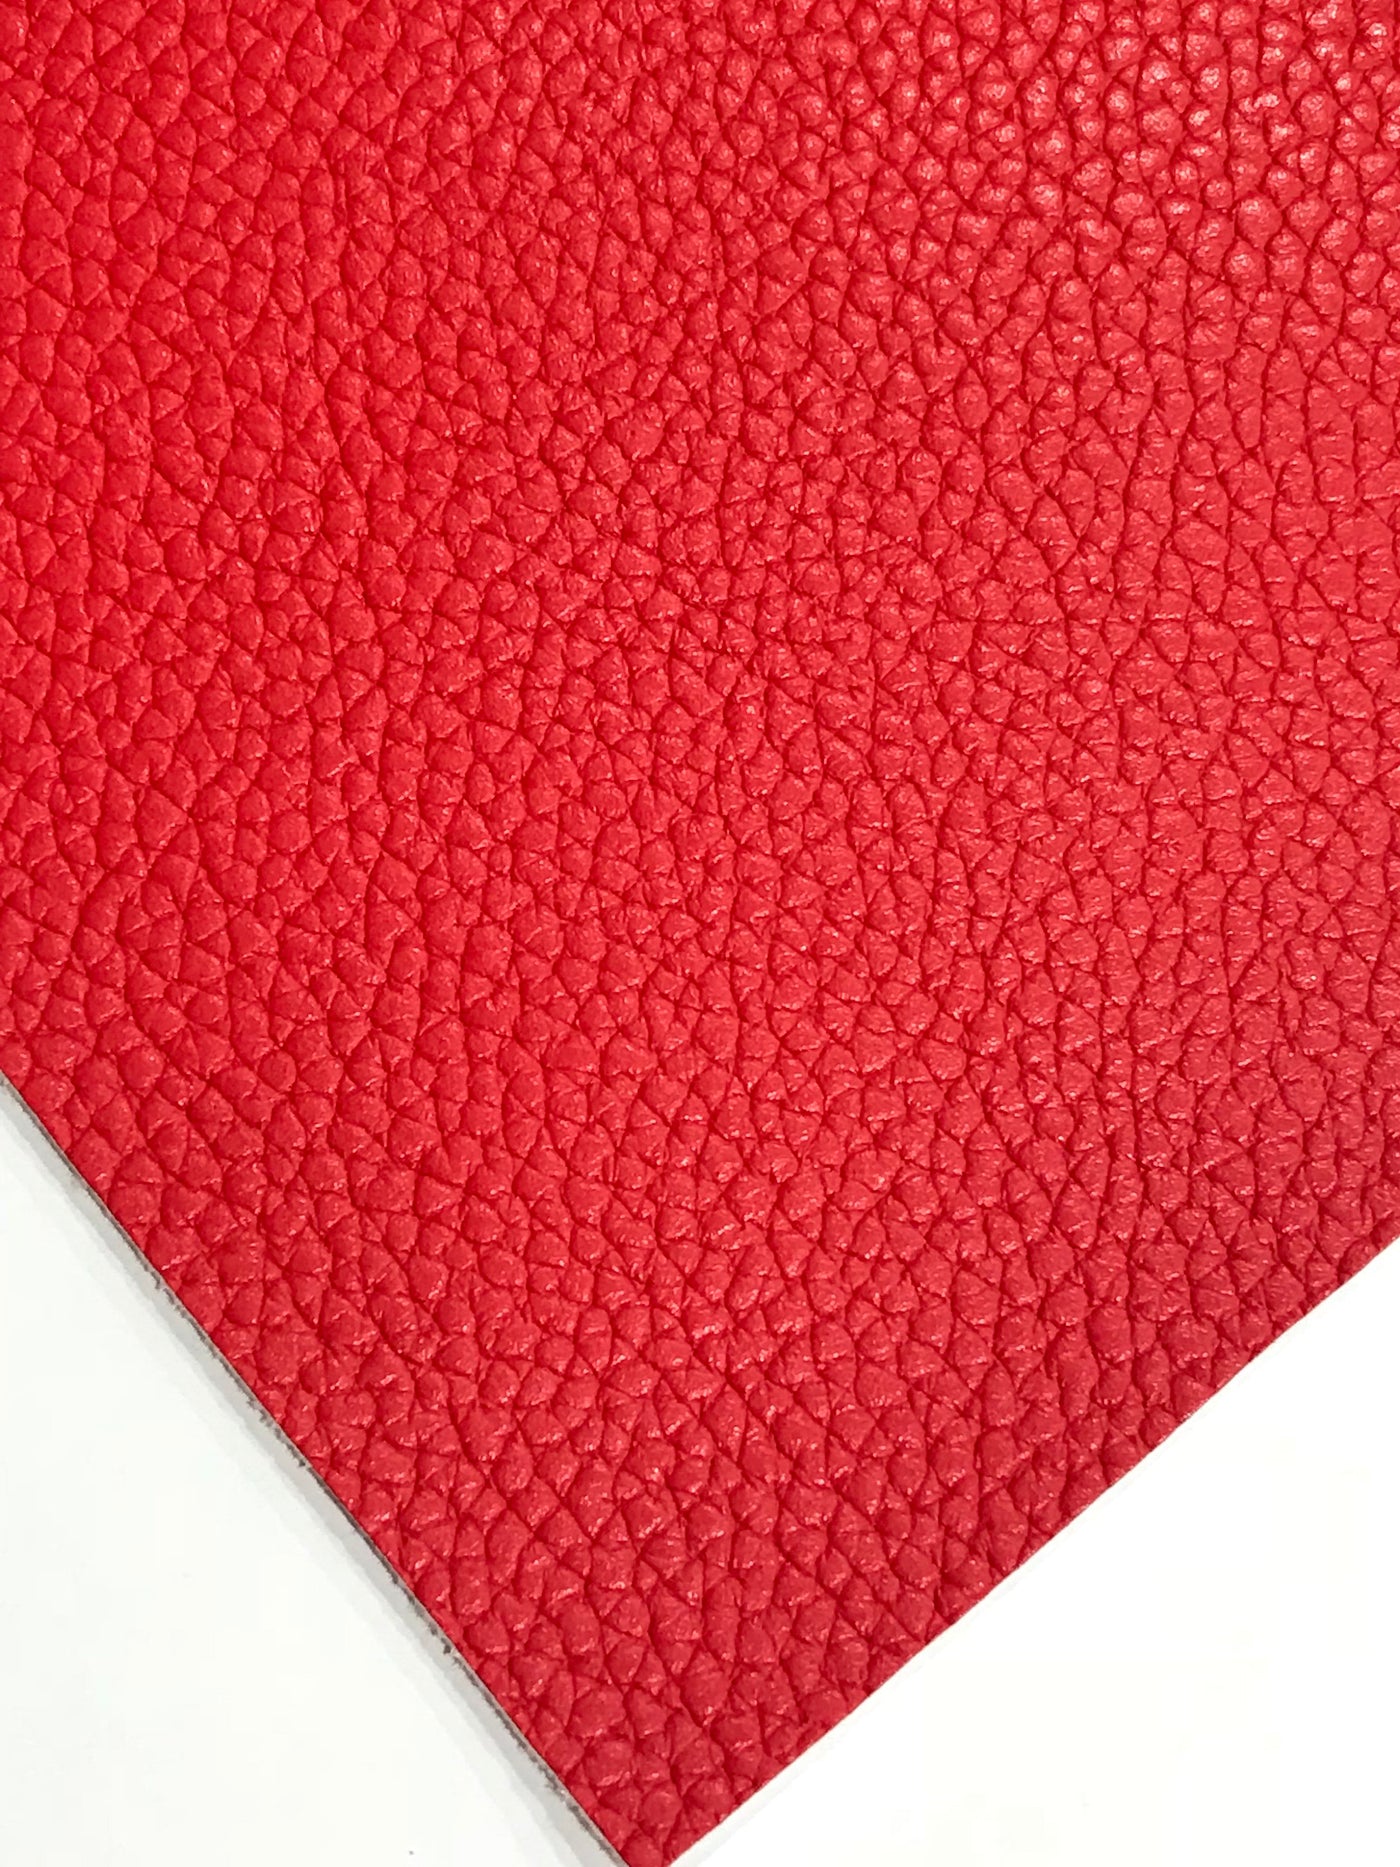 Red Leatherette Sheet 1.2 mm  A4 -  8X11